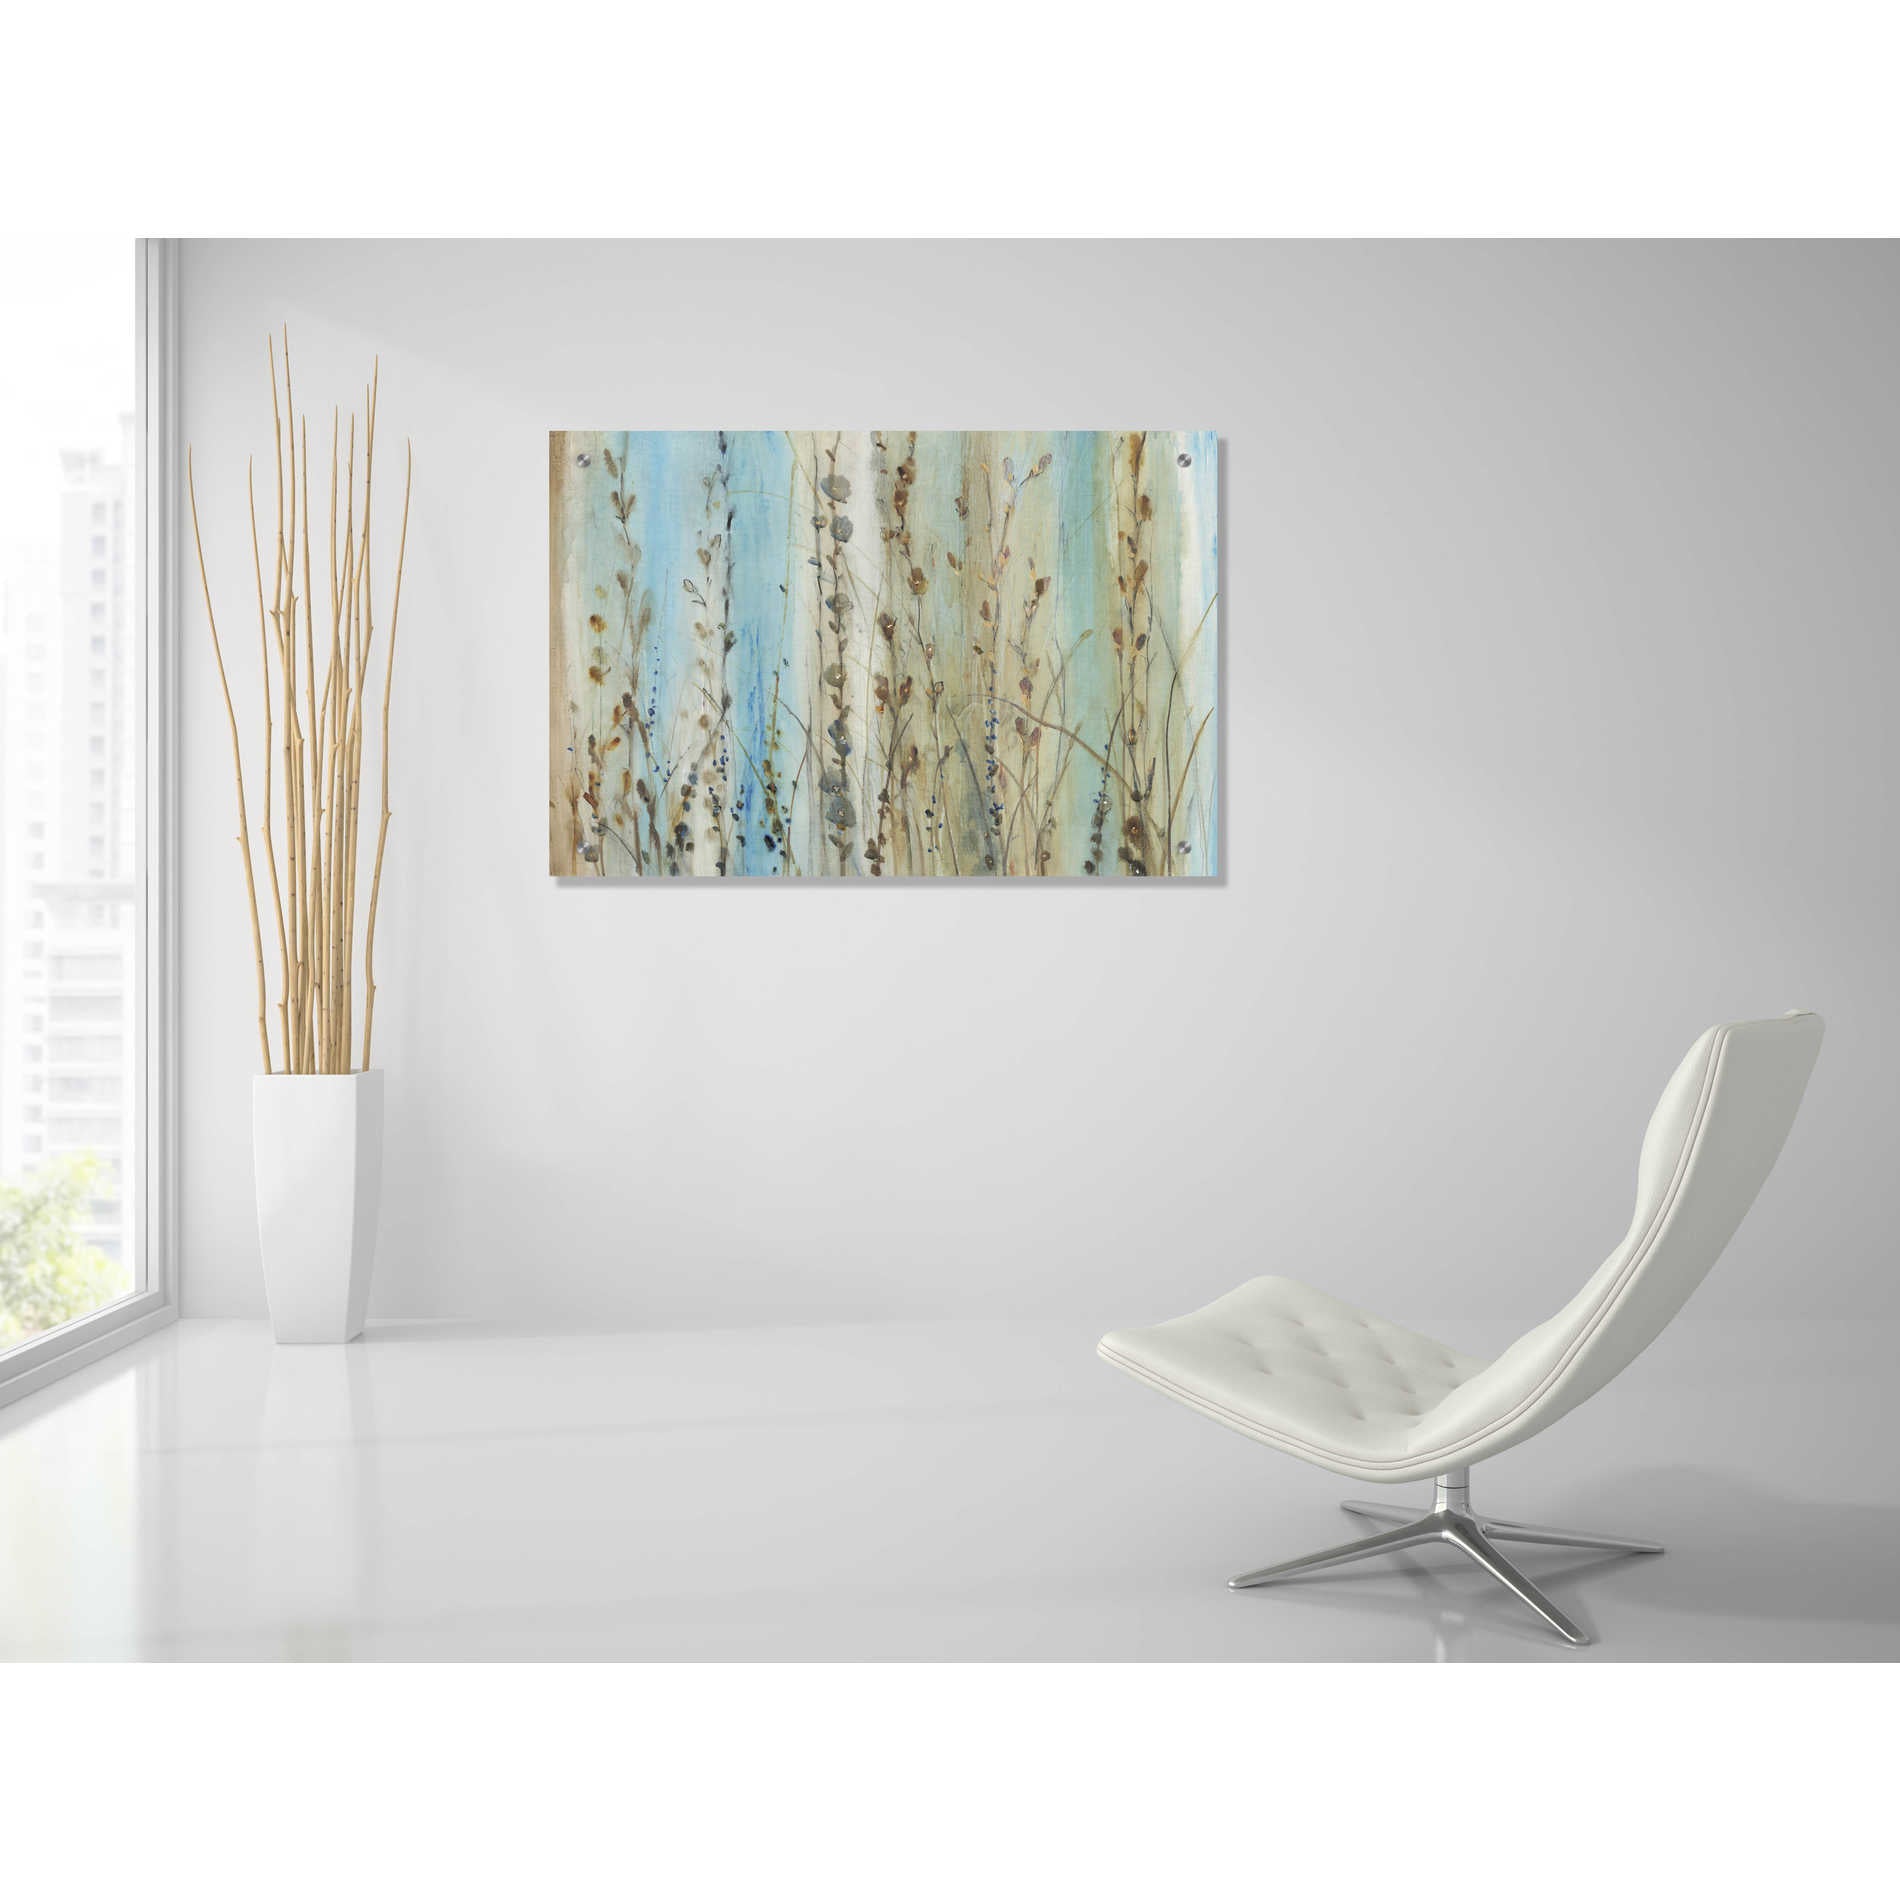 Epic Art 'Ombre Floral I' by Tim O'Toole, Acrylic Glass Wall Art,36x24